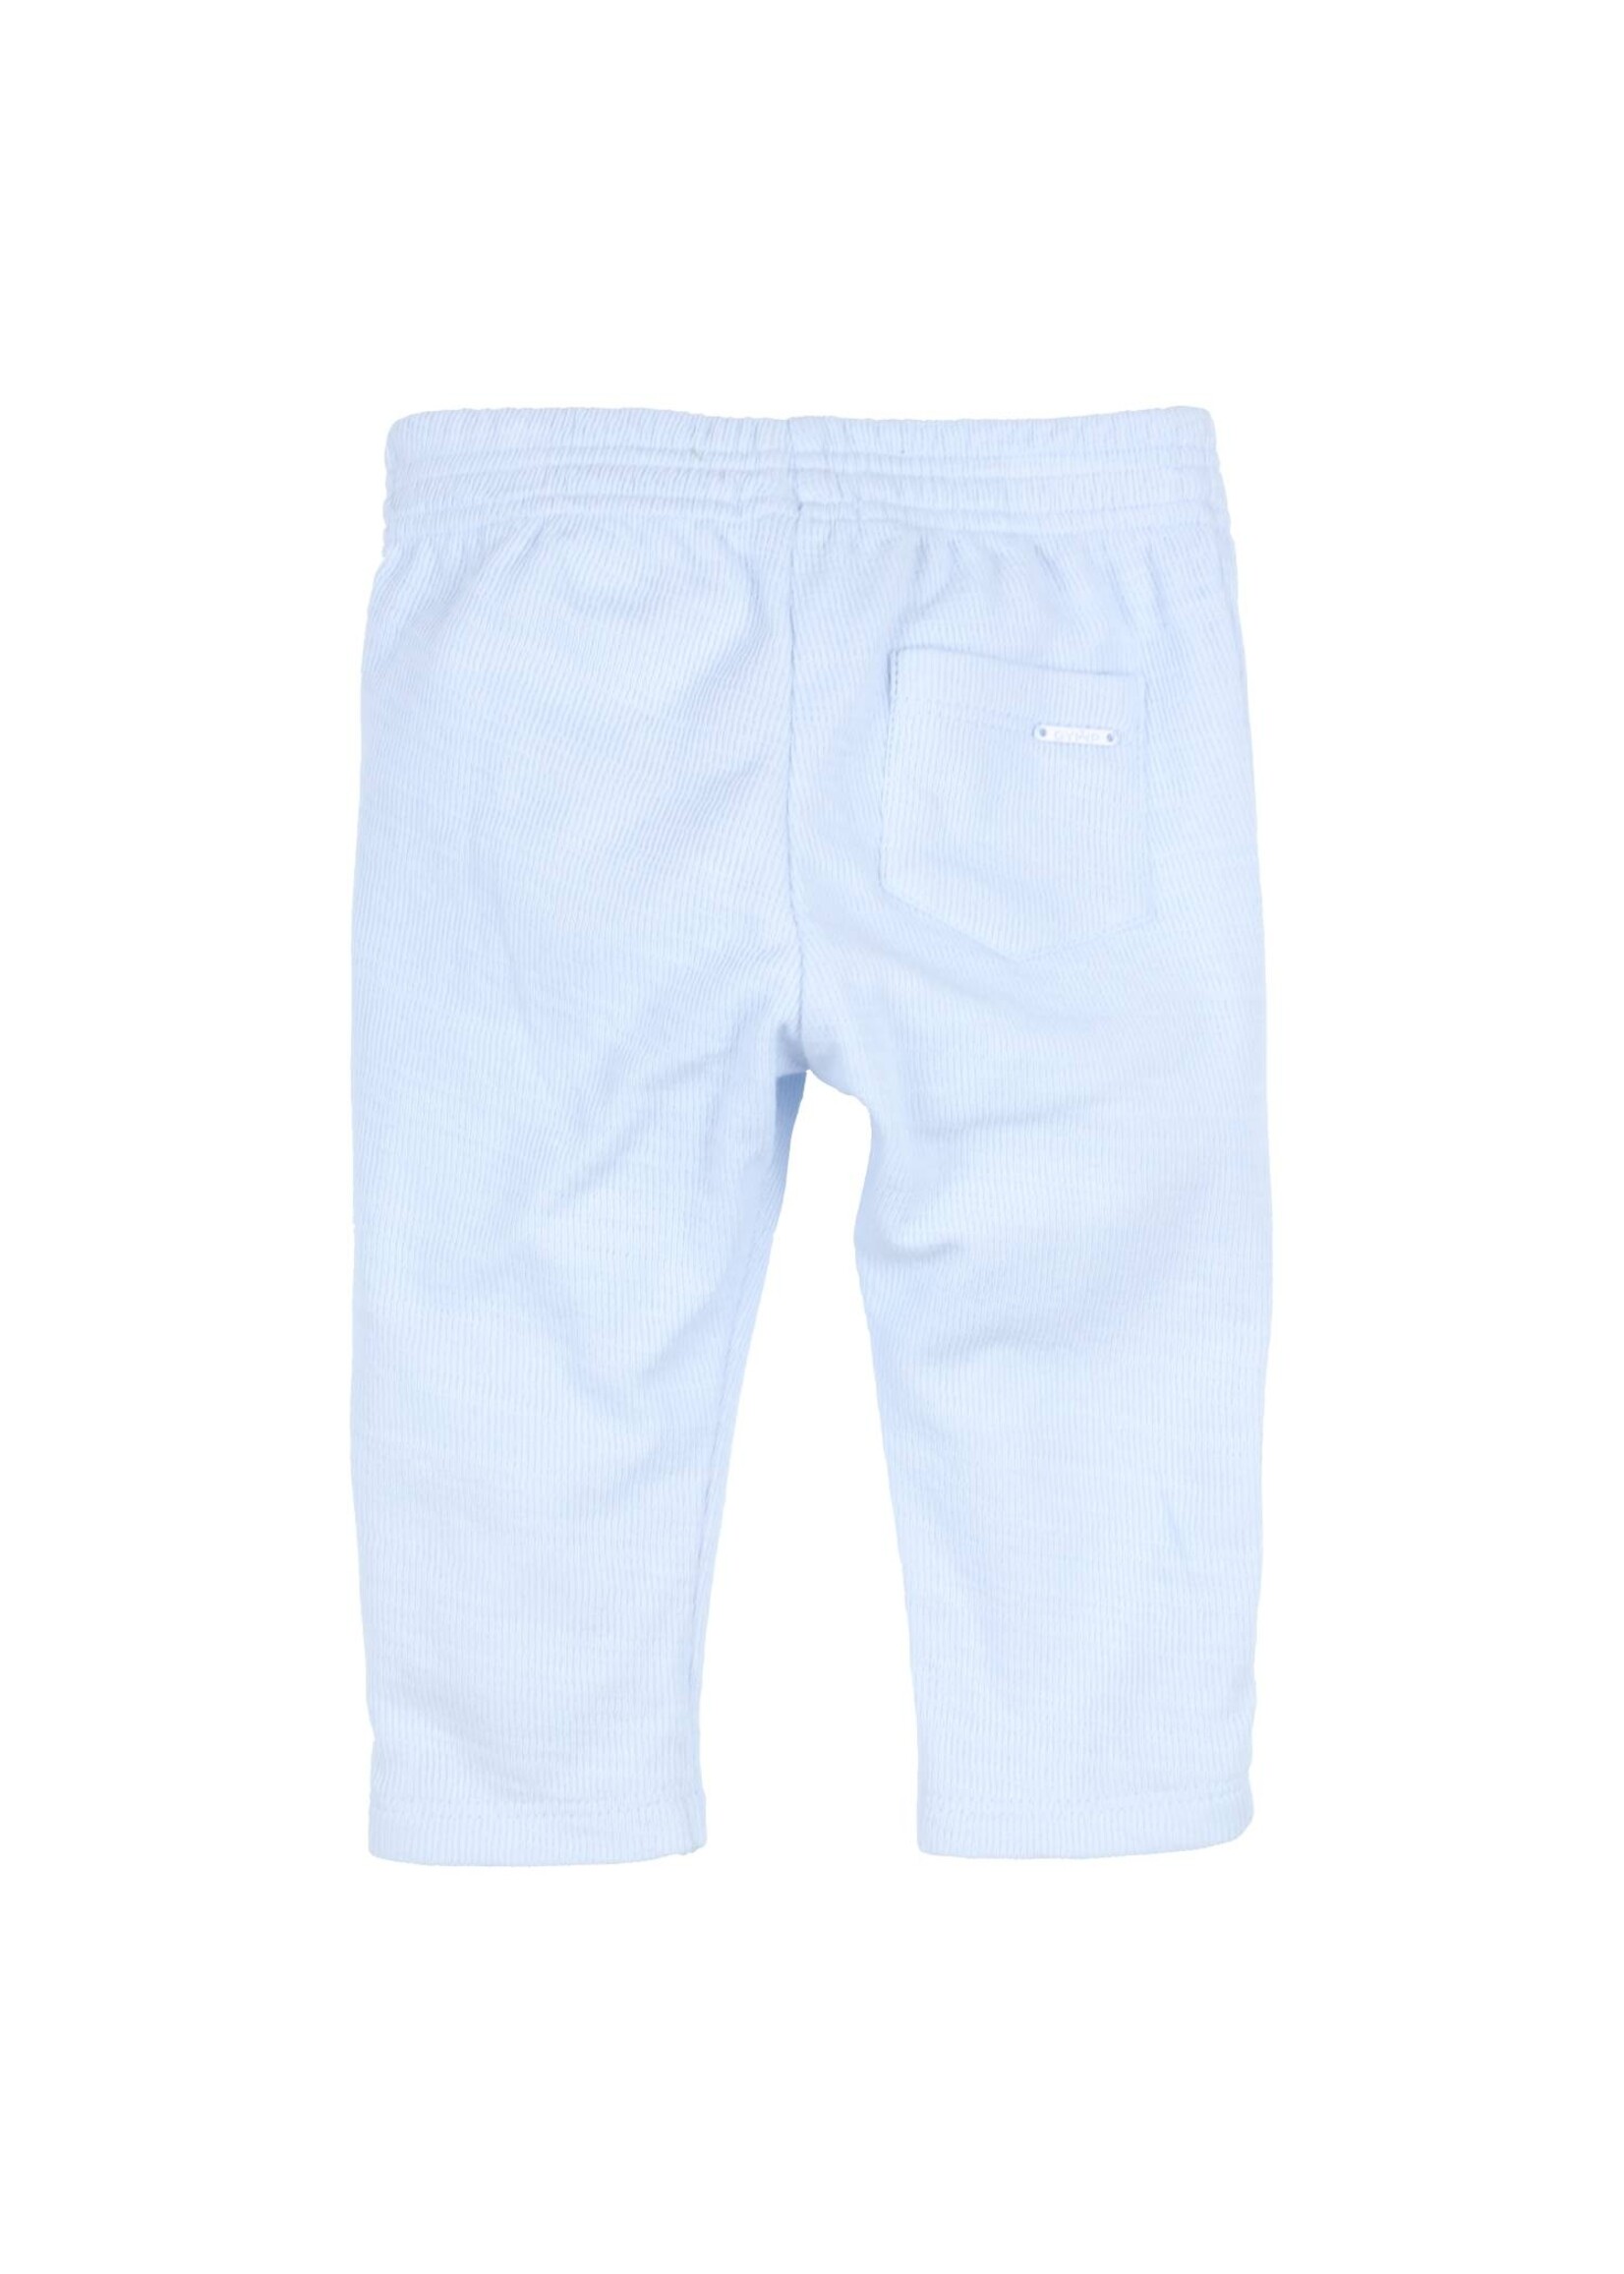 Gymp Boys Trousers Anthony 410-4459-20 Light Blue